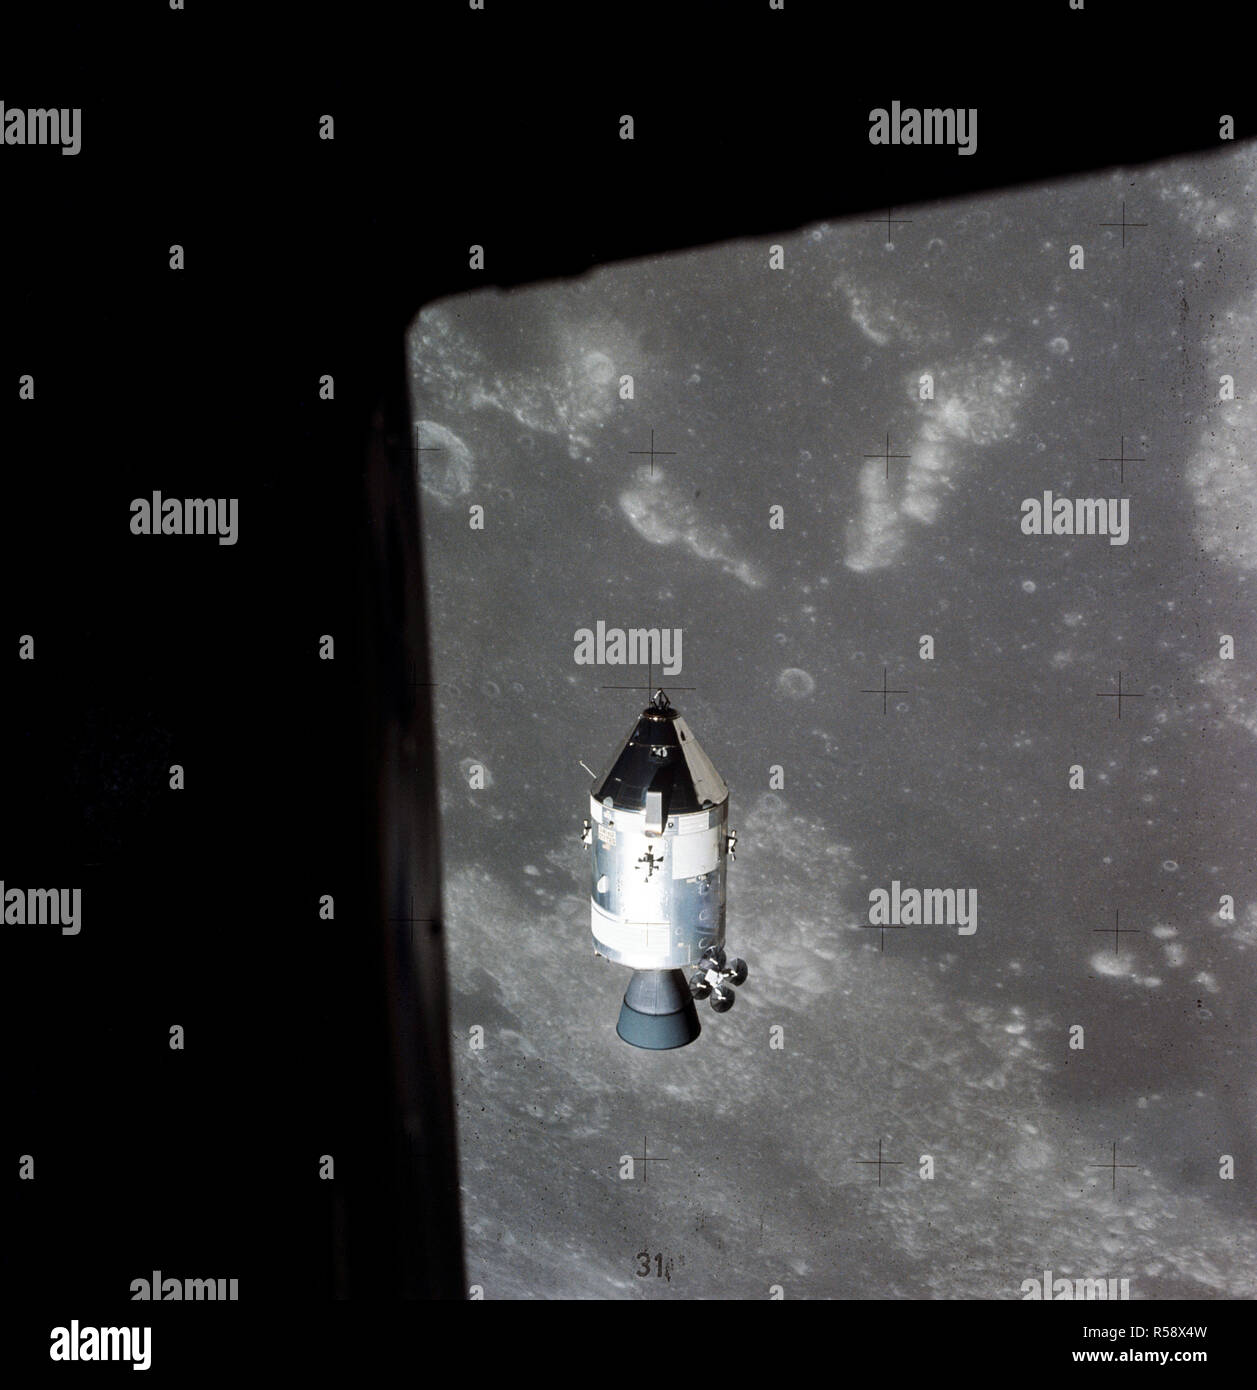 (30 July 1971) --- A view of the Apollo 15 Command and Service Modules (CSM) in lunar orbit as photographed from the Lunar Module (LM) just after rendezvous. The lunar nearside is in the background. This view is looking southeast into the Sea of Fertility. The crater Taruntius is at the right center edge of the picture. Stock Photo